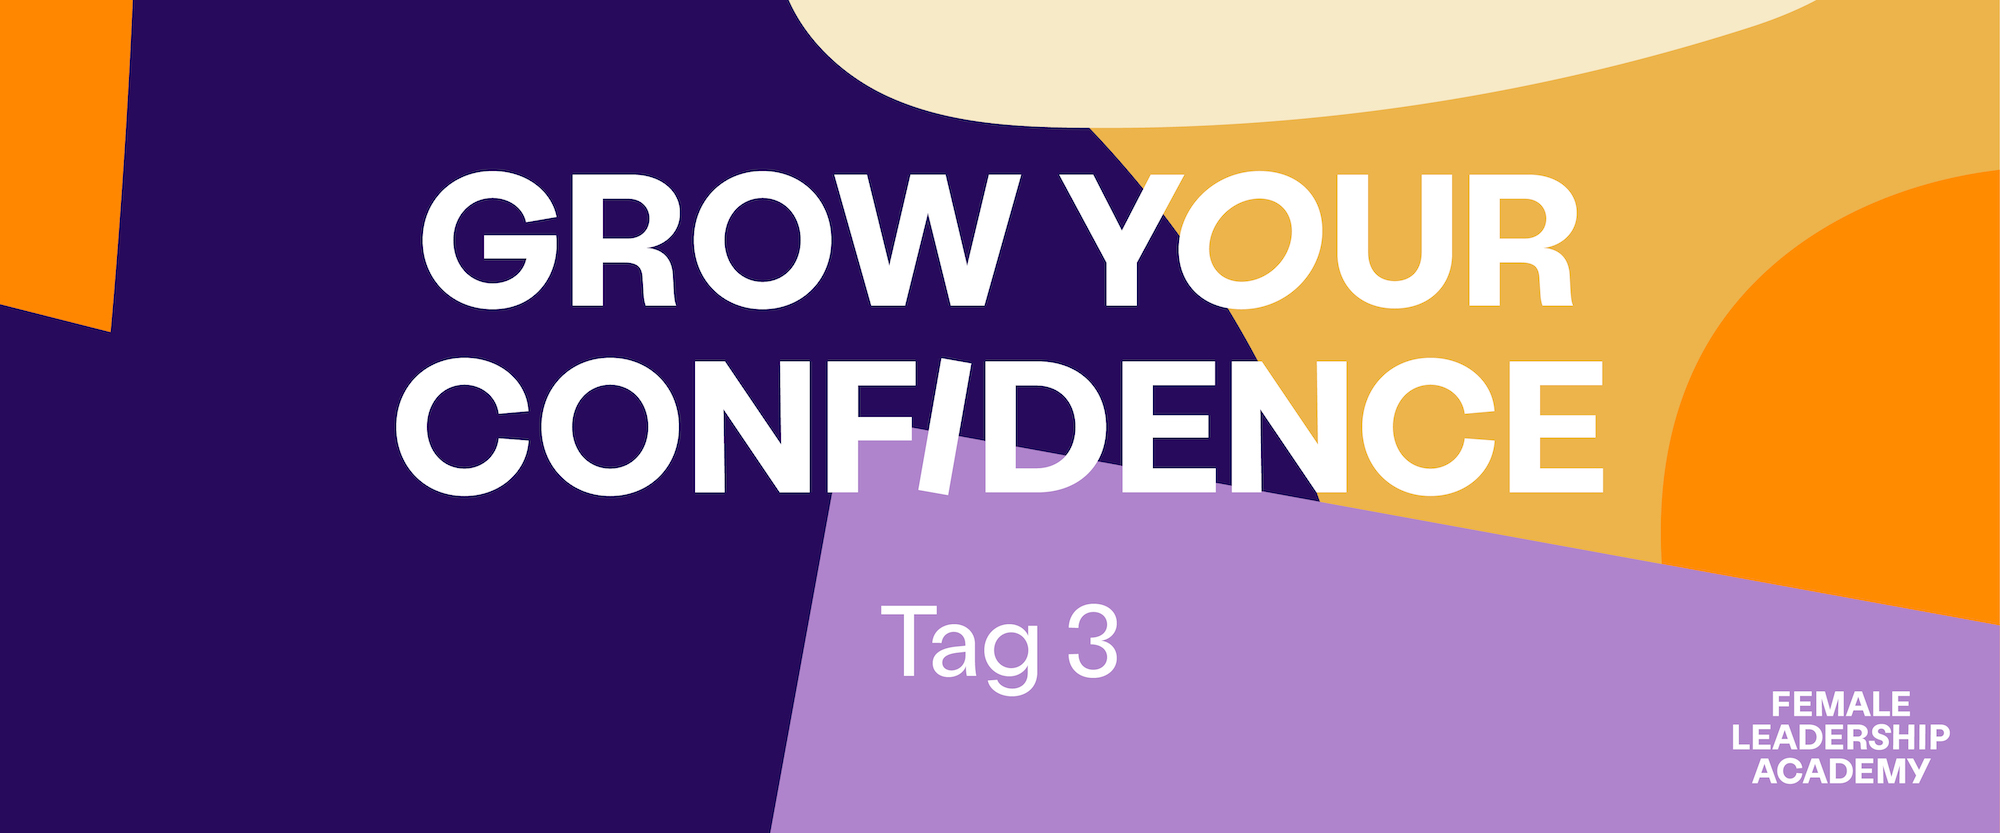 Grow your confidence - Tag 3